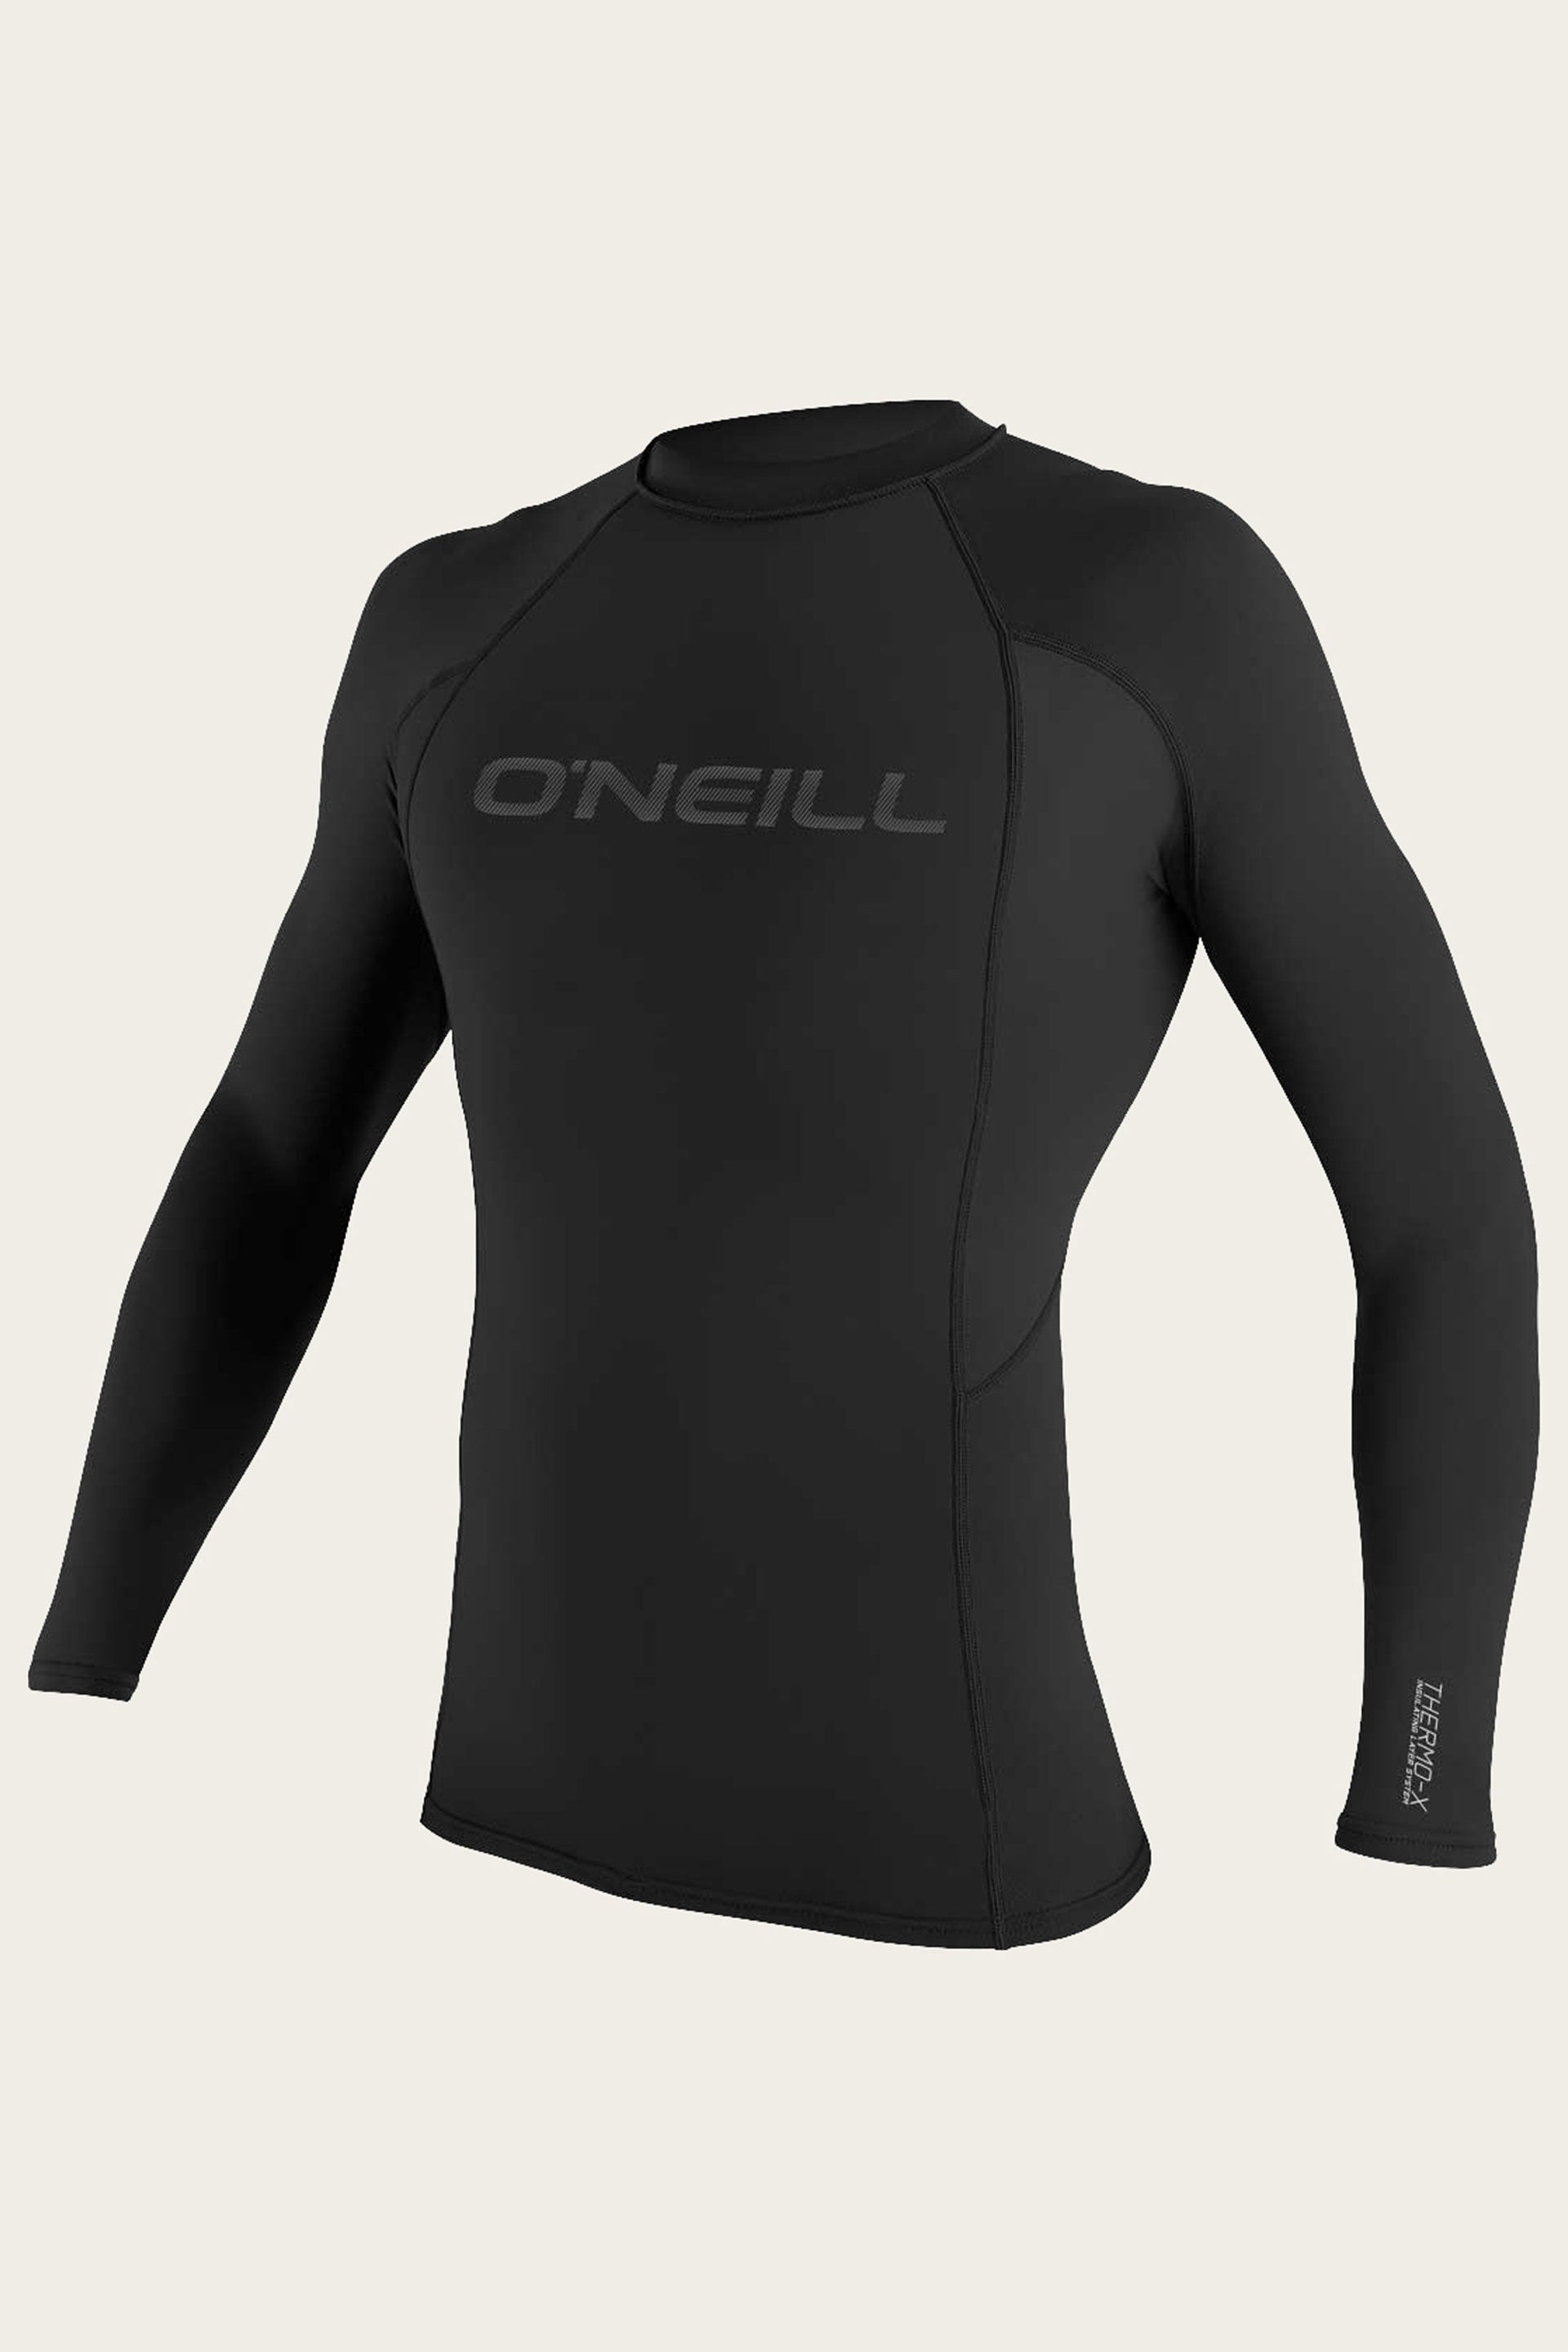 ONeill Thermo-X Hooded Thermal Vest Top Black Thermal Warm Heat Layer Layers Quick dry Easy Stretch Thermal Lining